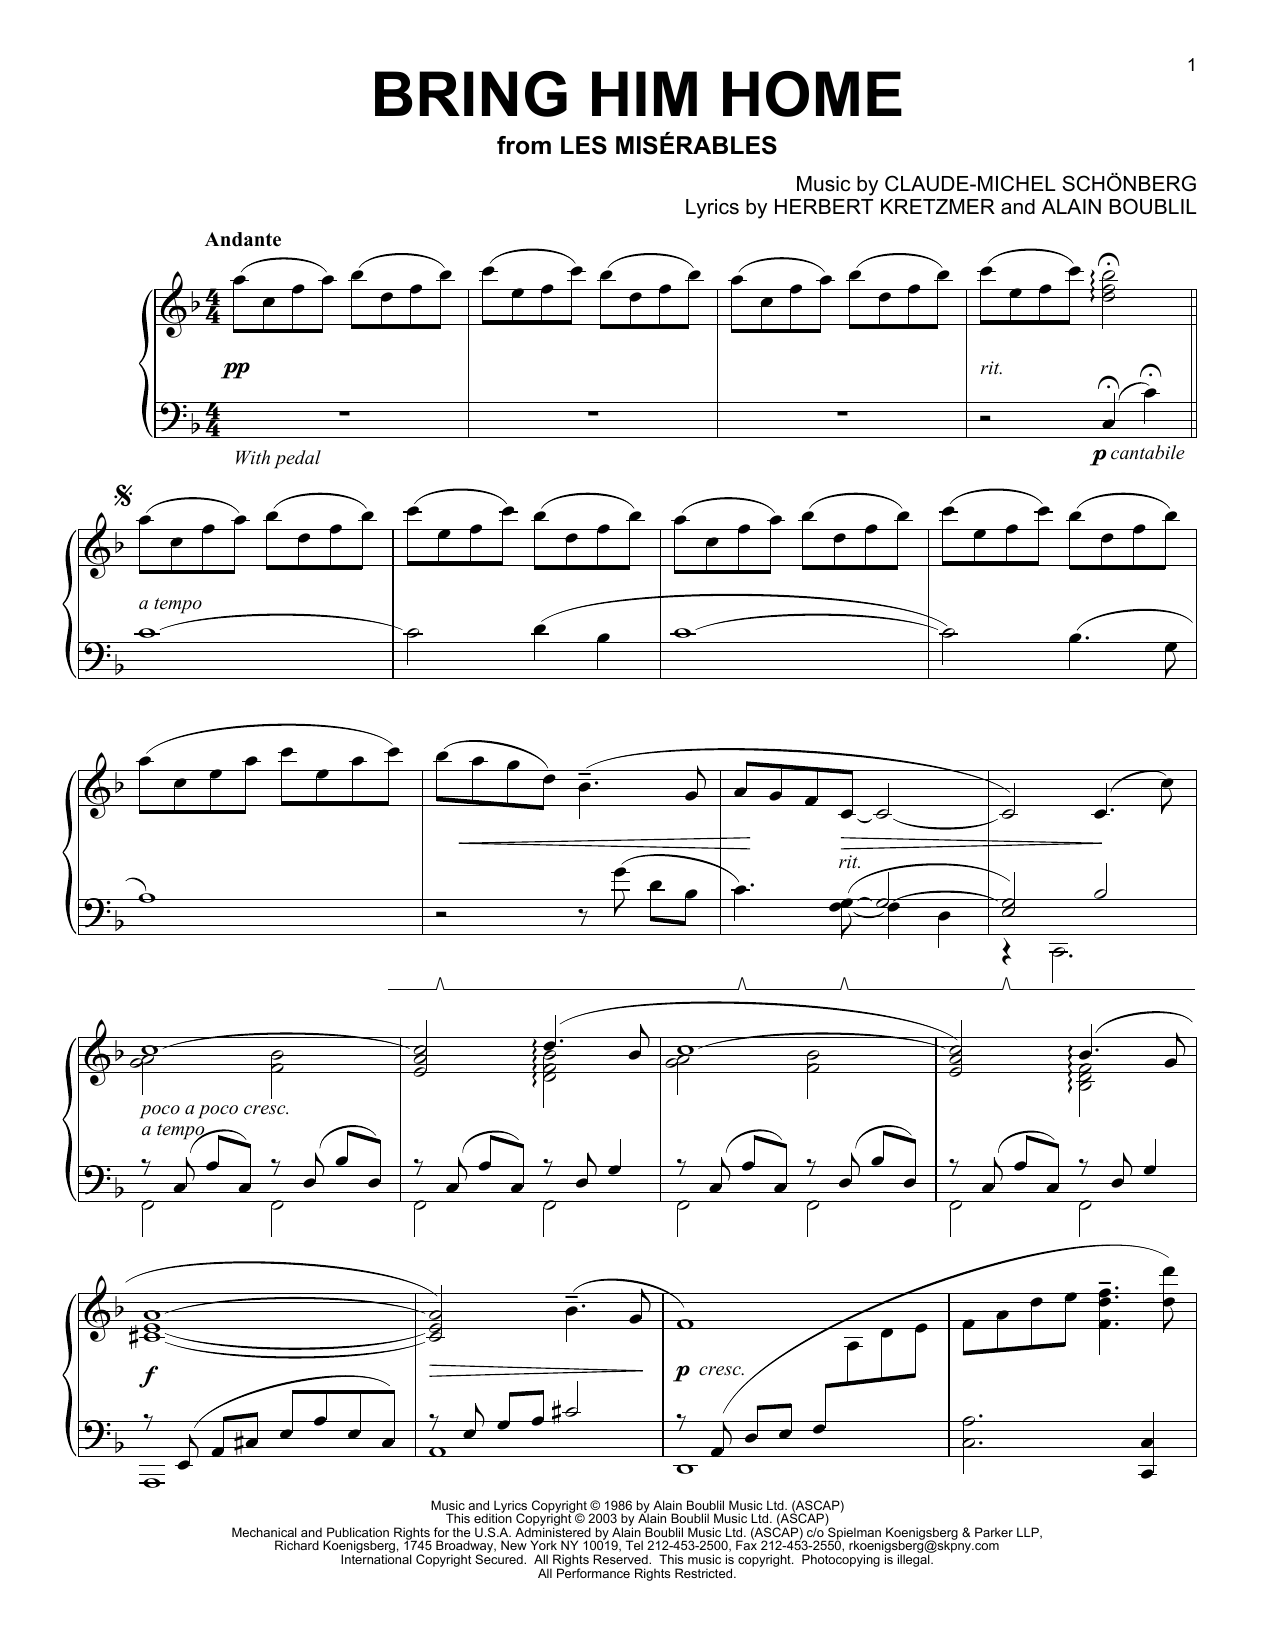 Boublil and Schonberg Bring Him Home sheet music preview music notes and score for Piano including 3 page(s)